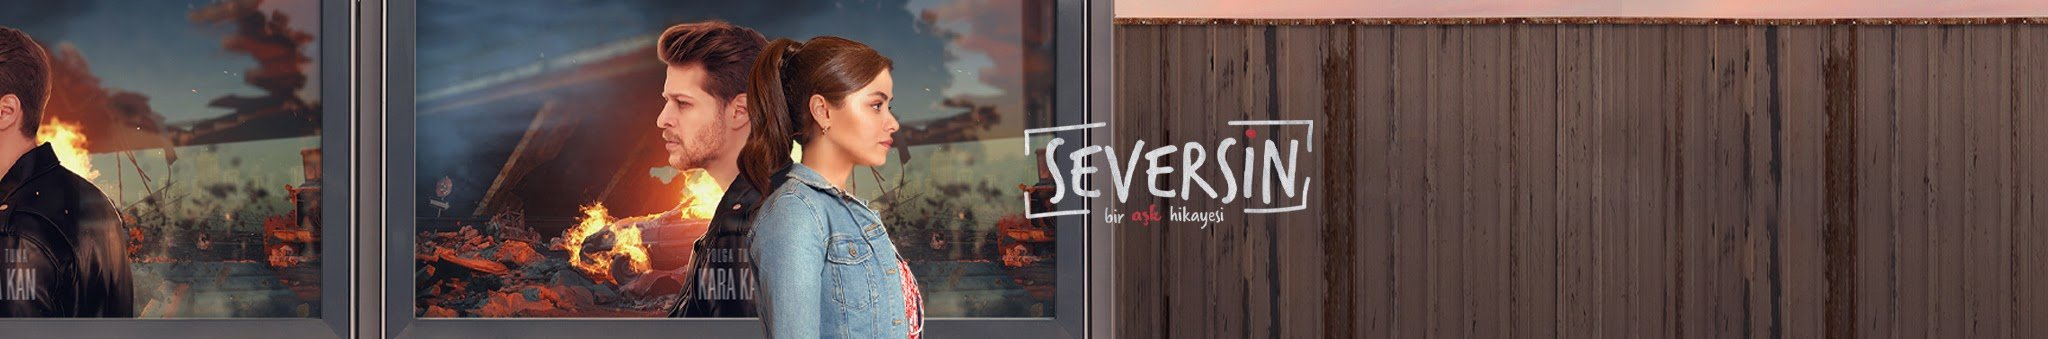 Seversin Wiki English - Love and Hate